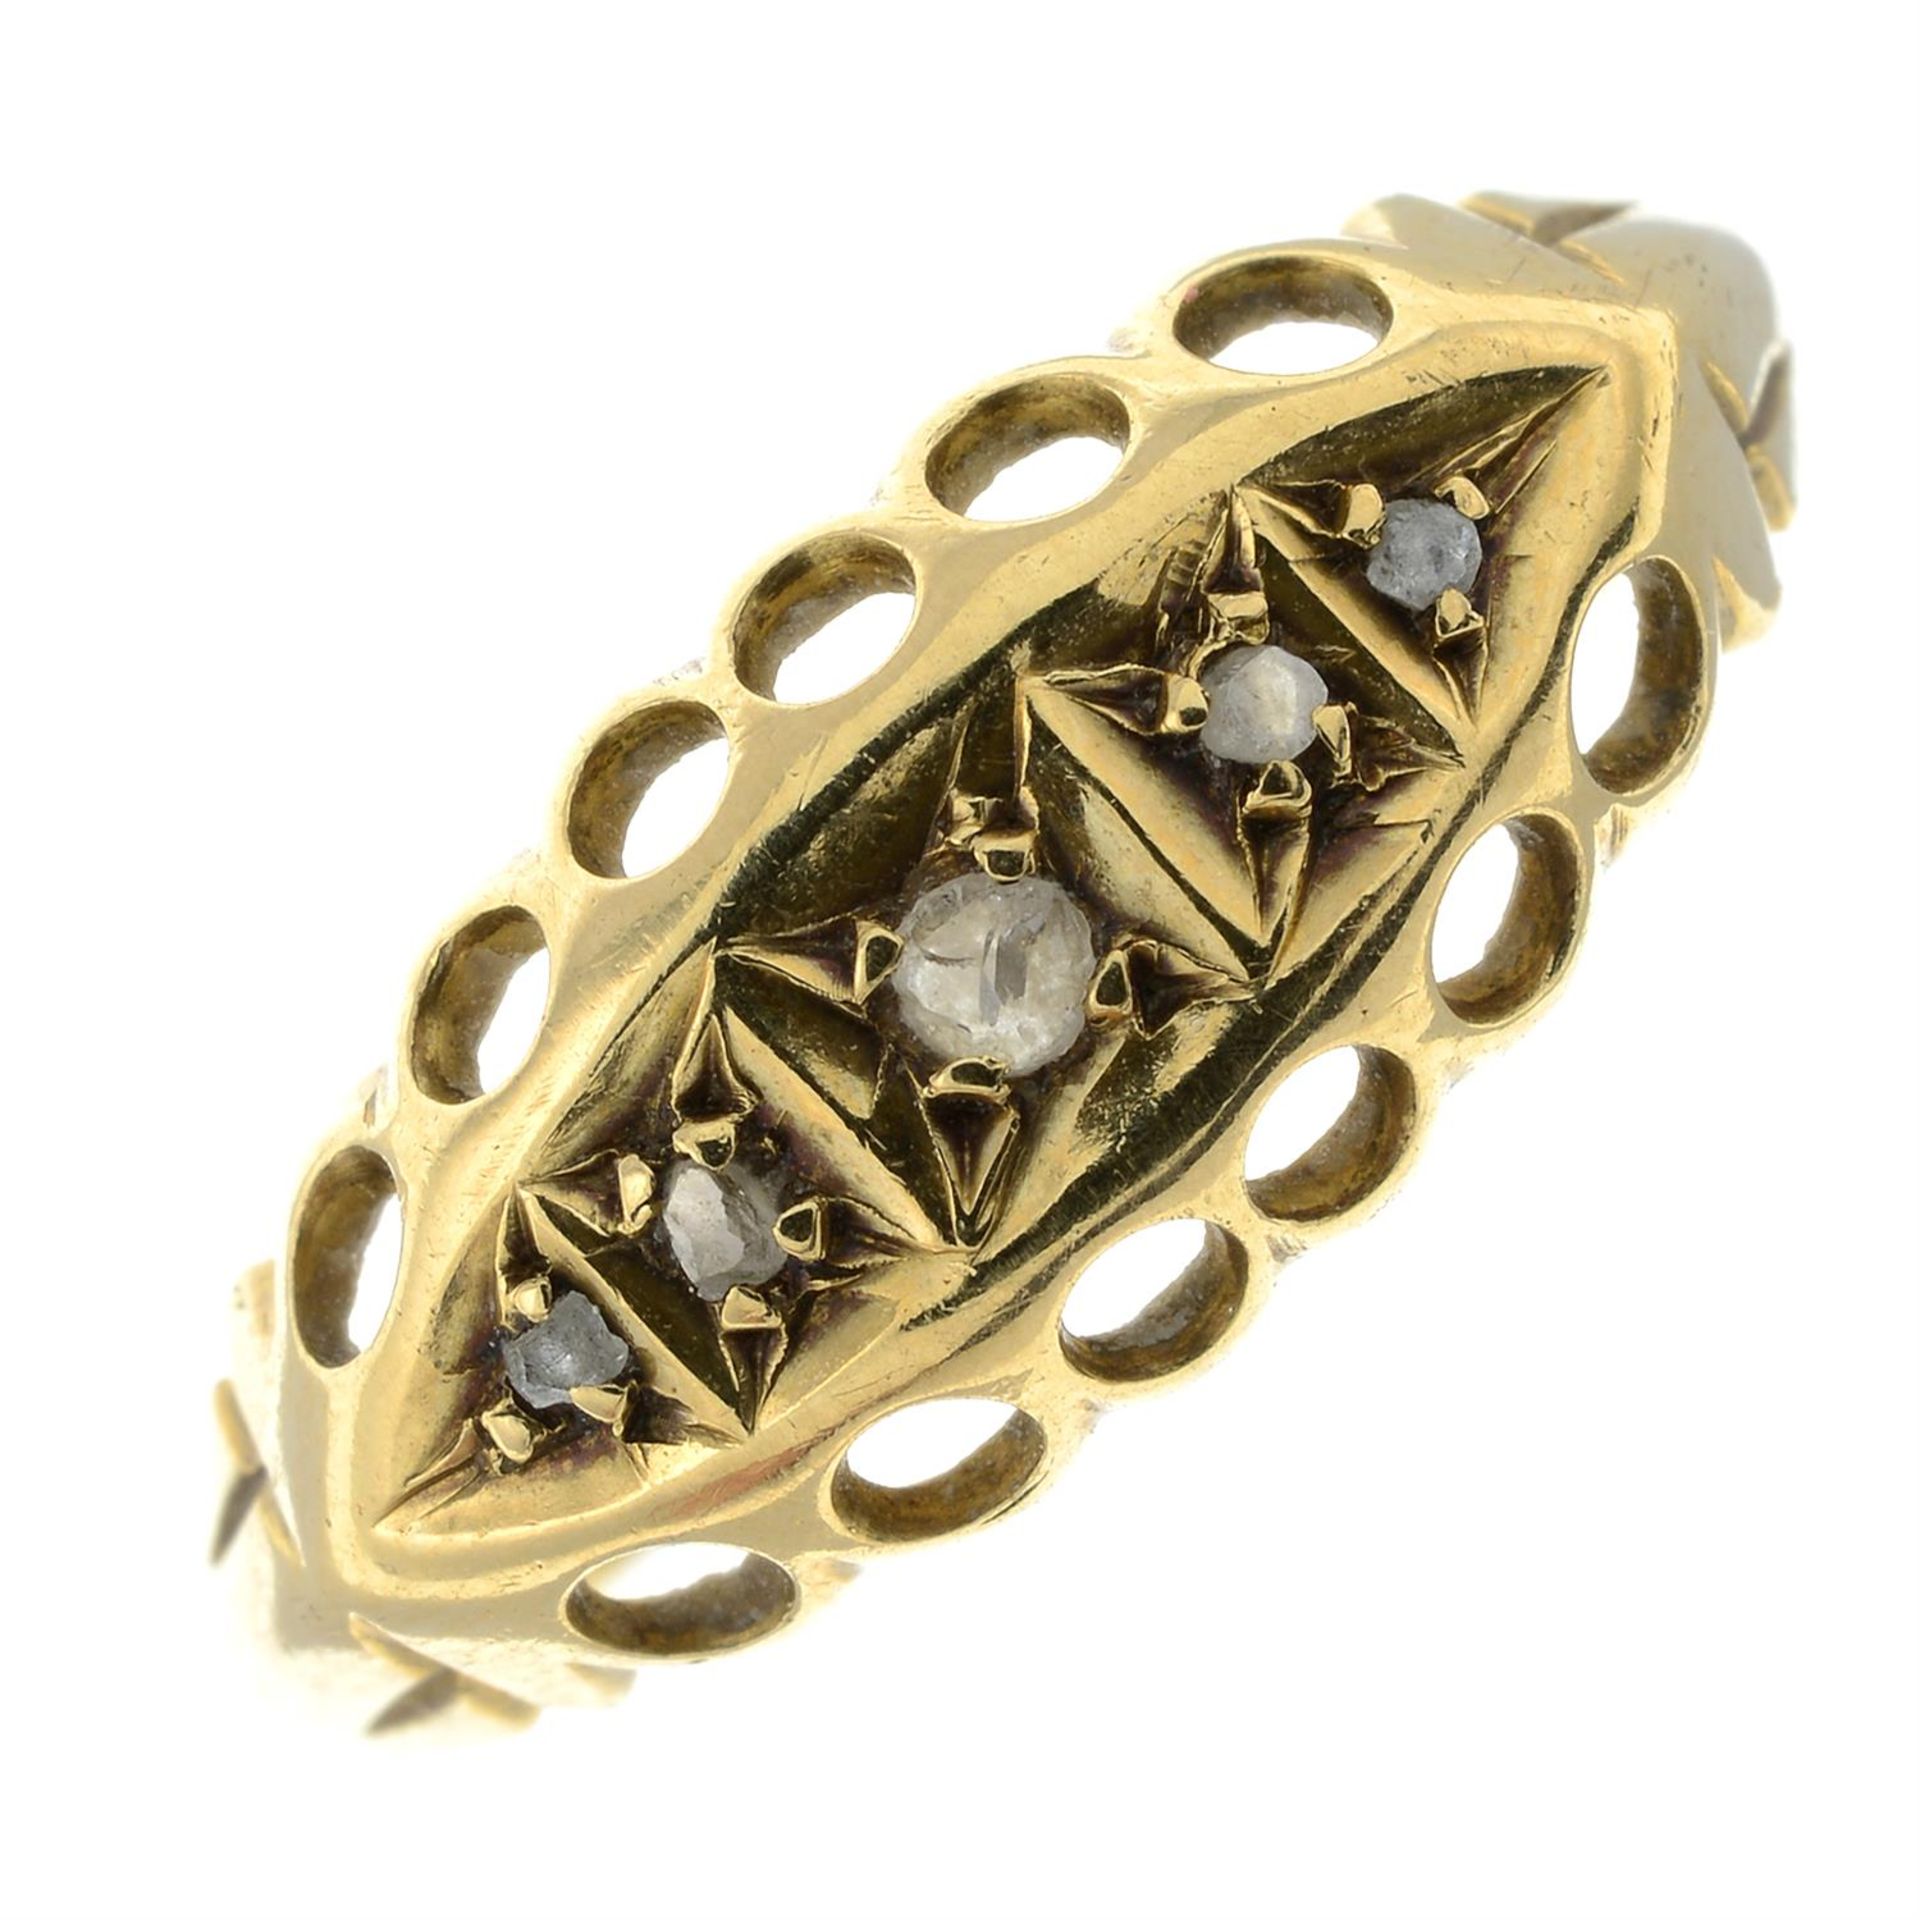 An early 20th century 18ct gold rose-cut diamond five-stone ring.